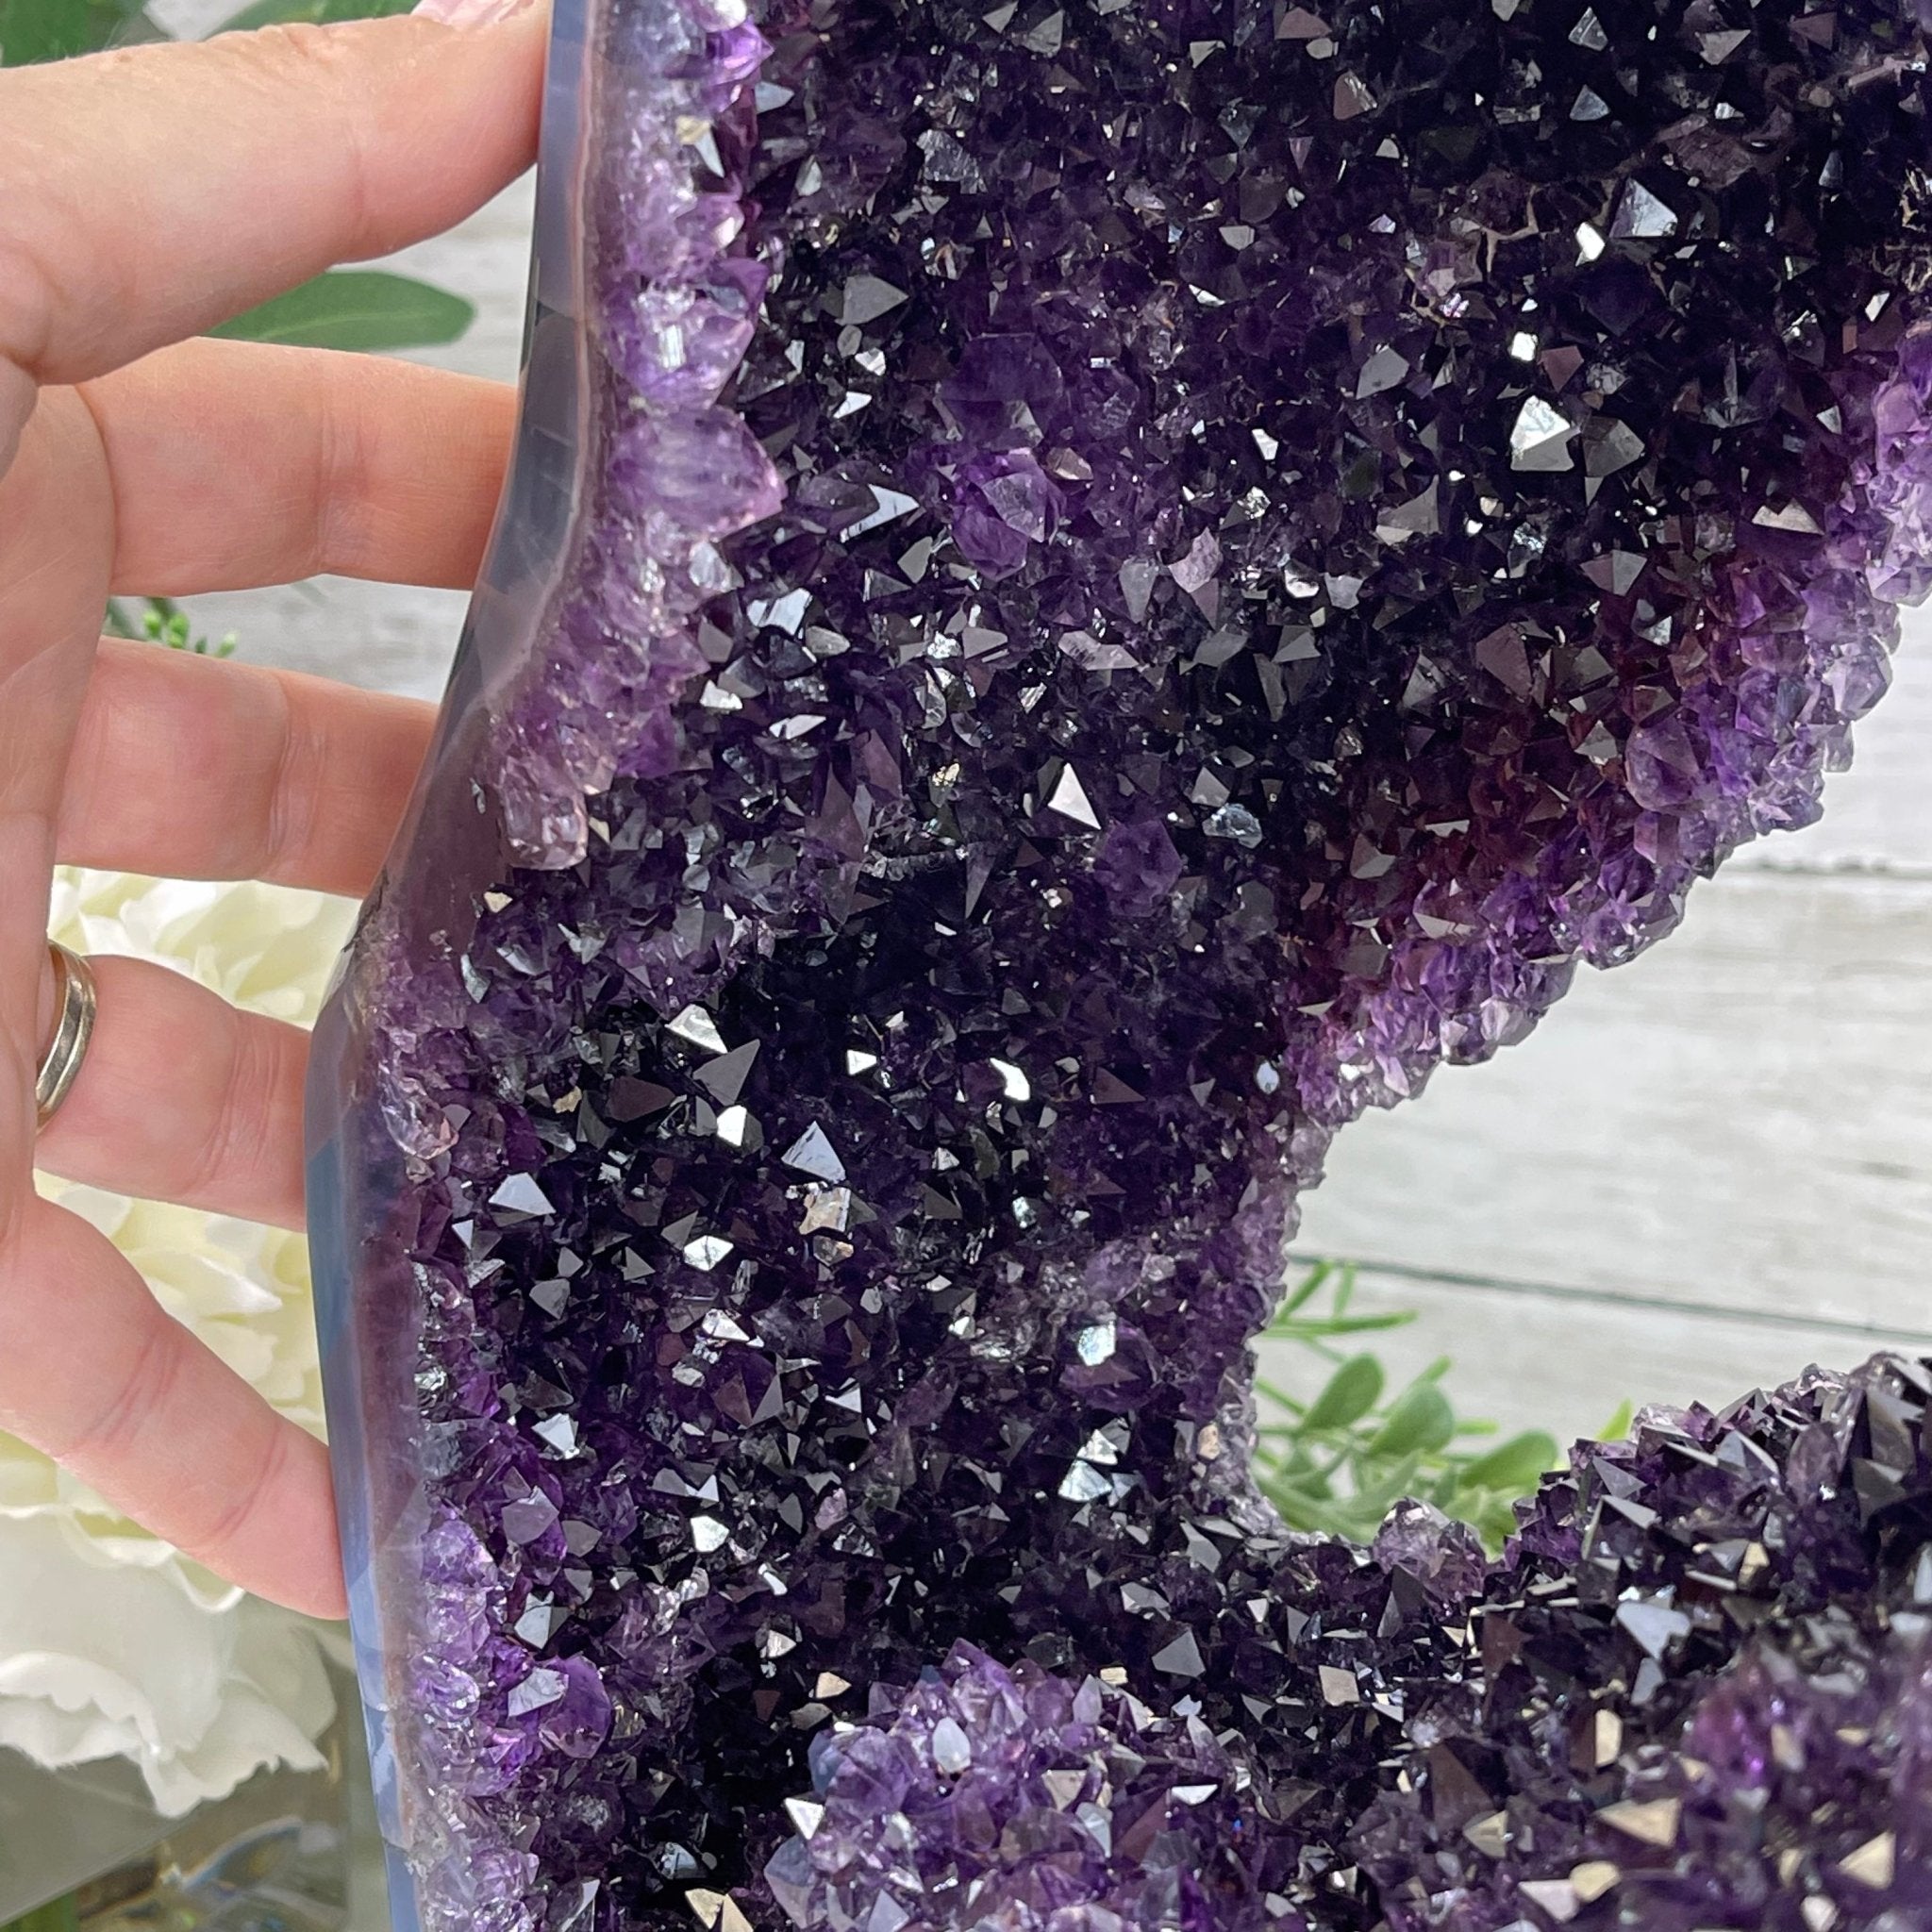 Super Quality Open 2-Sided Brazilian Amethyst Cathedral, 21.9 lbs, 11" tall, #5605-0088 by Brazil Gems - Brazil GemsBrazil GemsSuper Quality Open 2-Sided Brazilian Amethyst Cathedral, 21.9 lbs, 11" tall, #5605-0088 by Brazil GemsOpen 2-Sided Cathedrals5605-0088